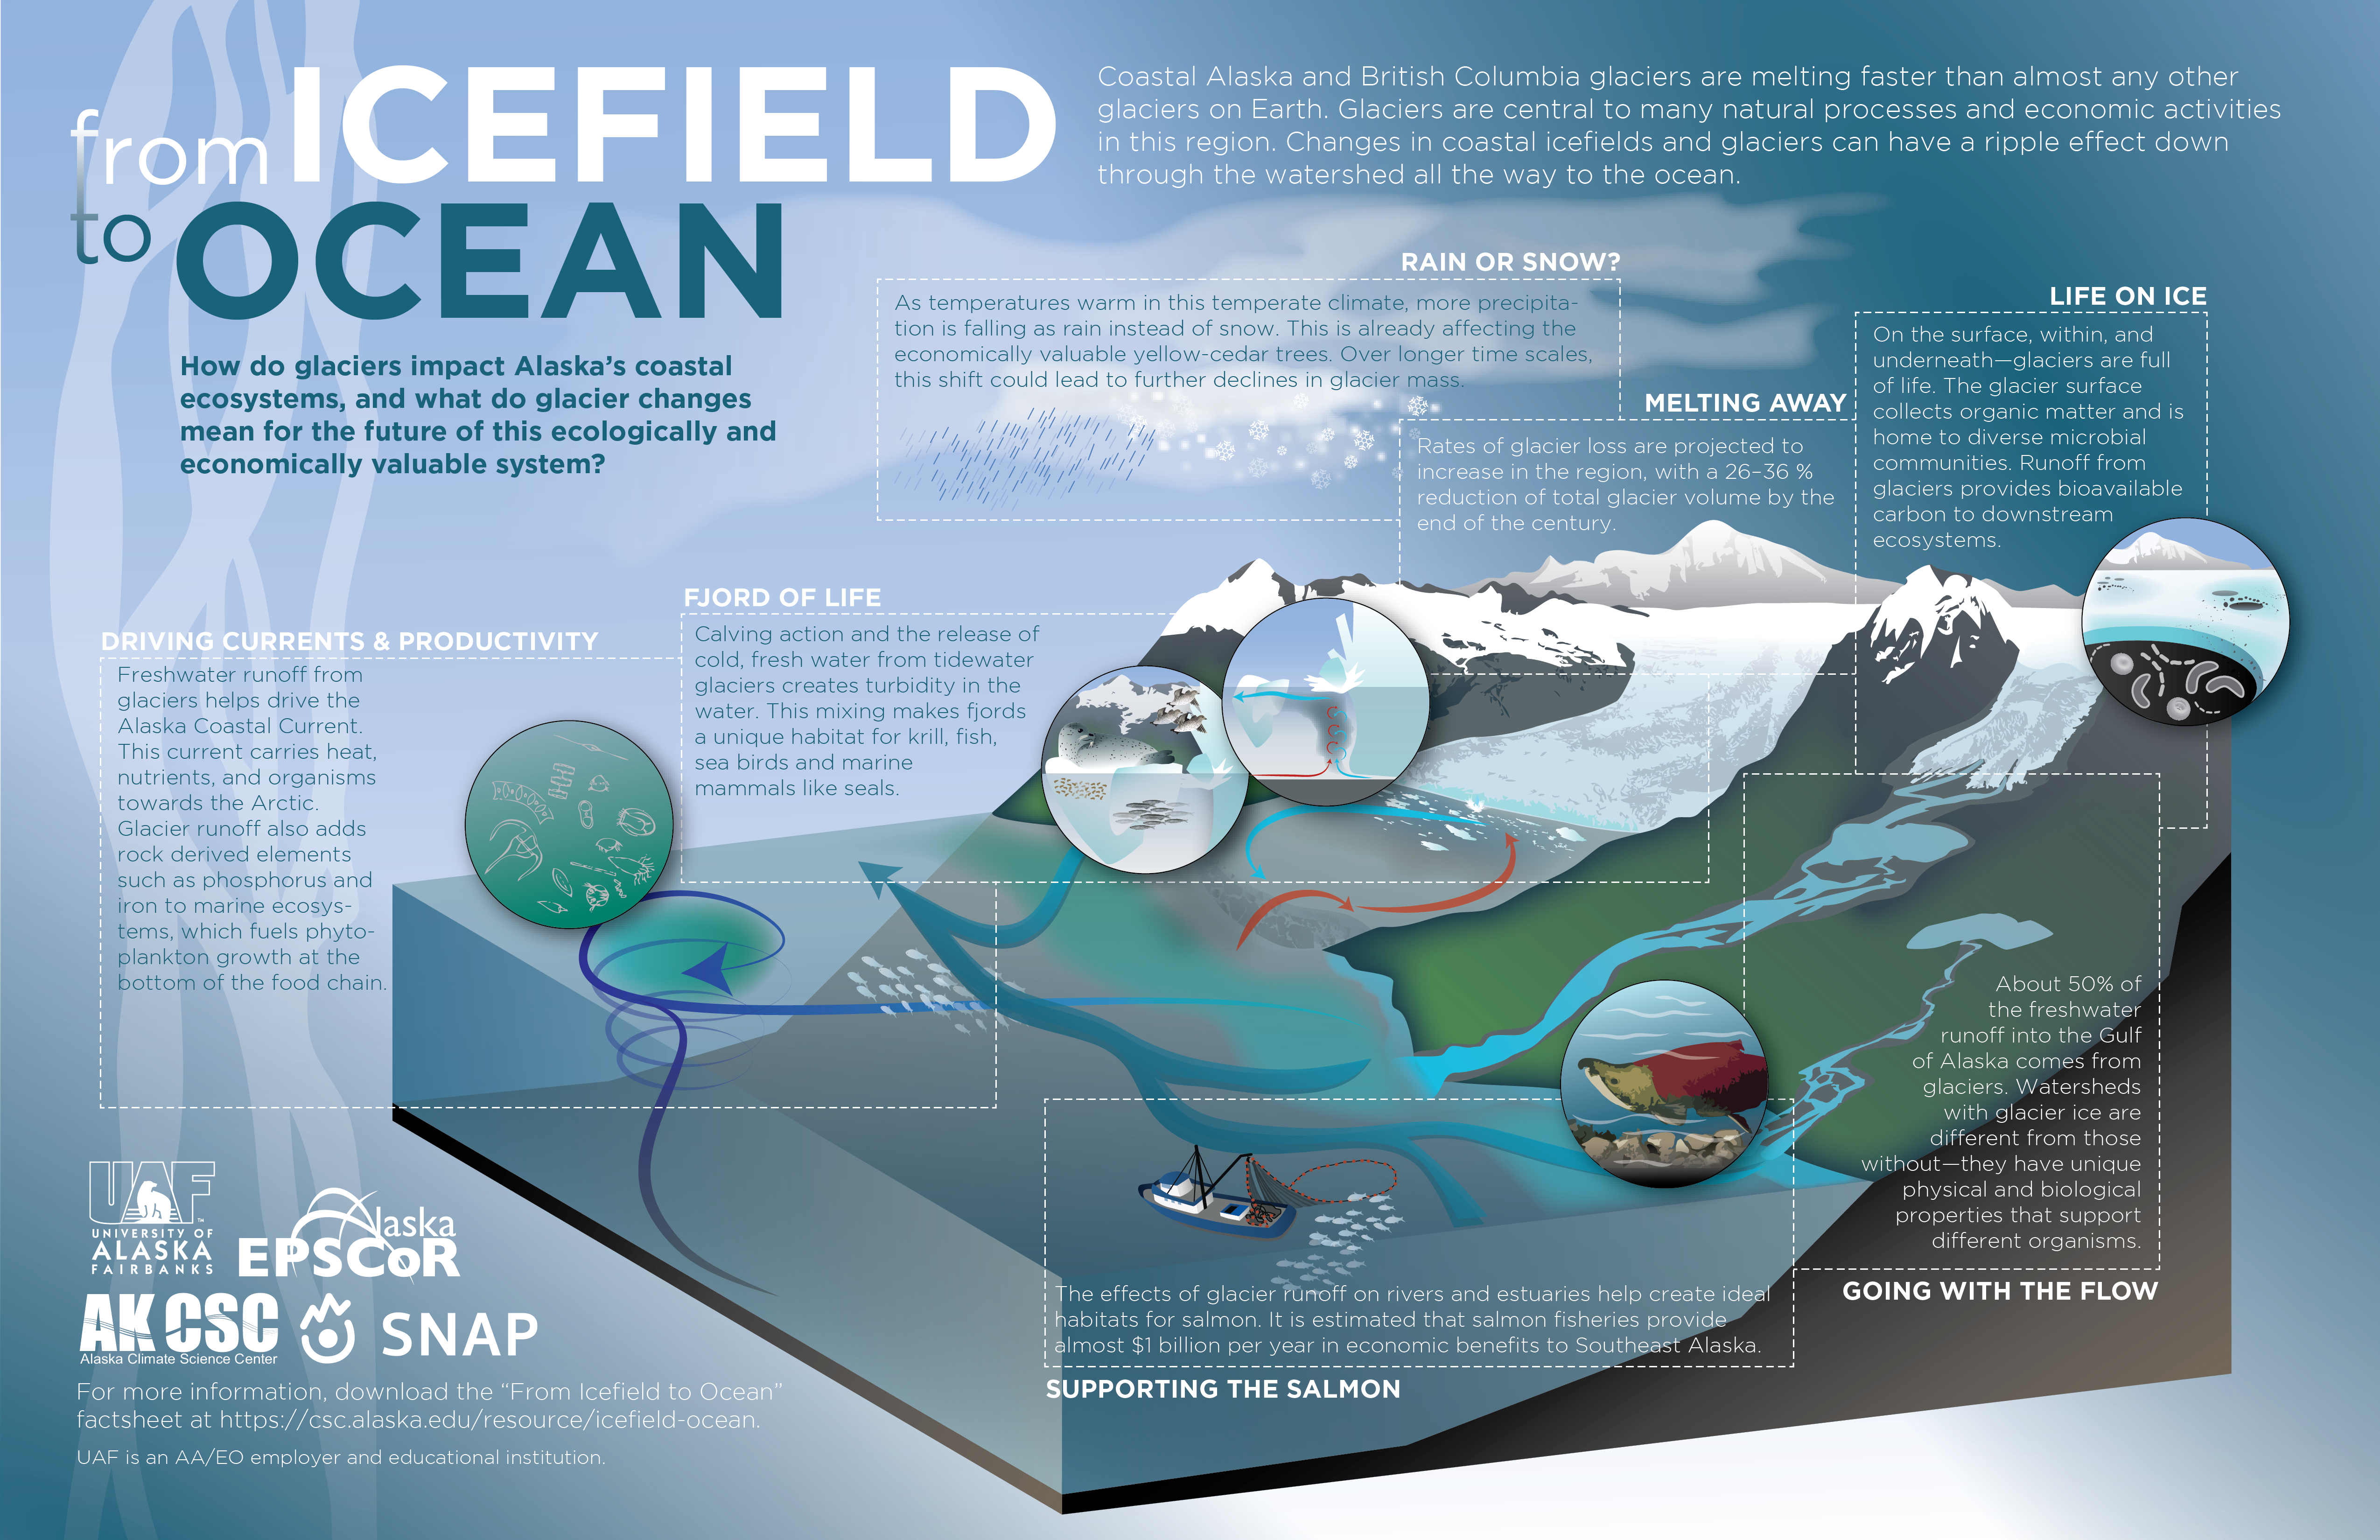 award-winning poster about links between glaciers and the ocean this year